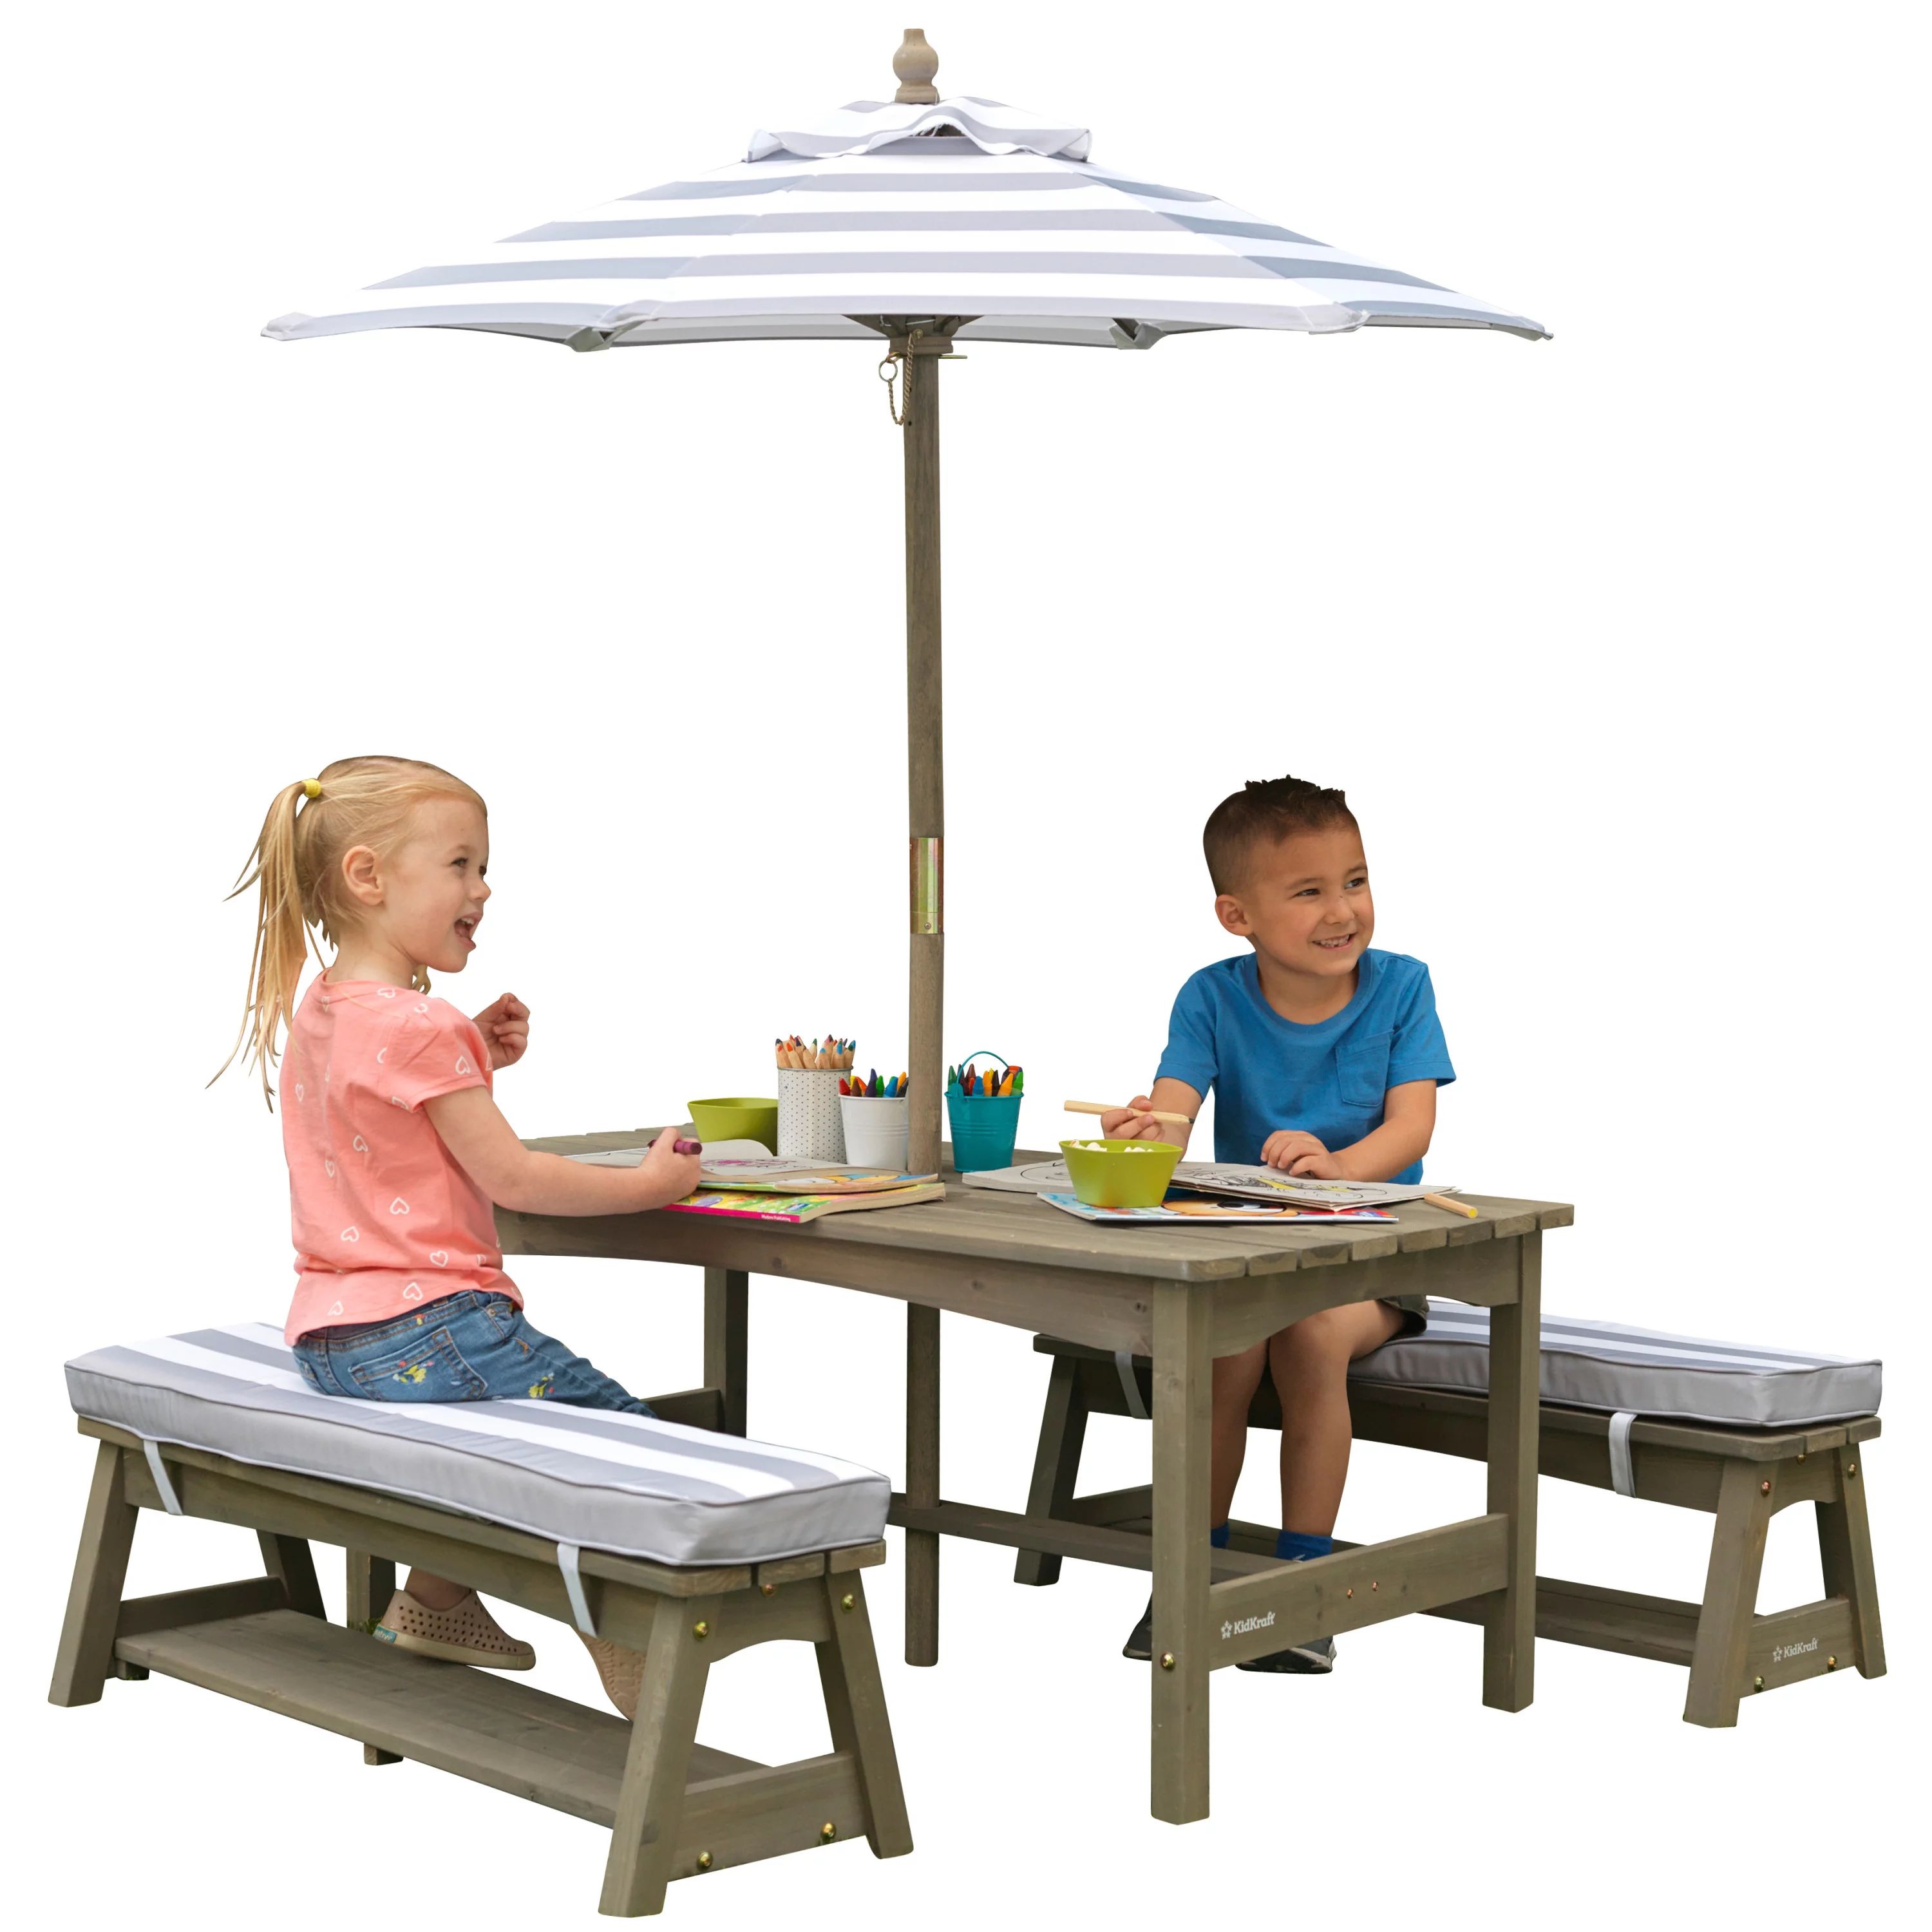 KidKraft Outdoor Table & Bench Set with Cushions and Umbrella, Gray and White Stripes | Walmart (US)